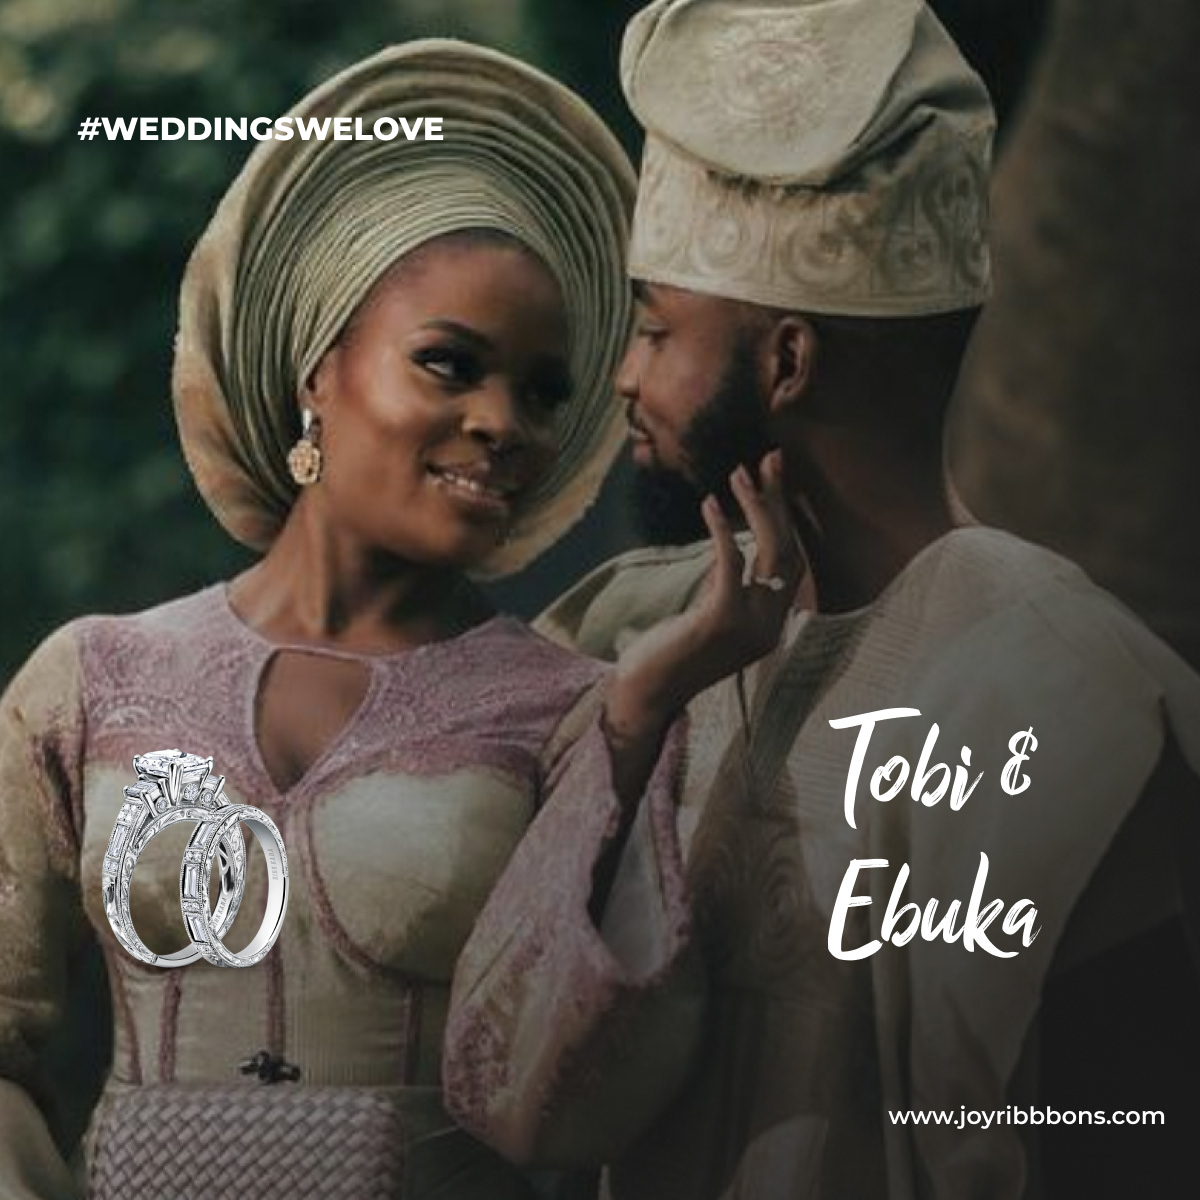 JoyRibbons is the home of all things weddings in Nigeria. We provide an easy-to-use wedding and gift registry
        for about to wed couples. Enjoy some of the Weddings We Love at JoyRibbons with these series